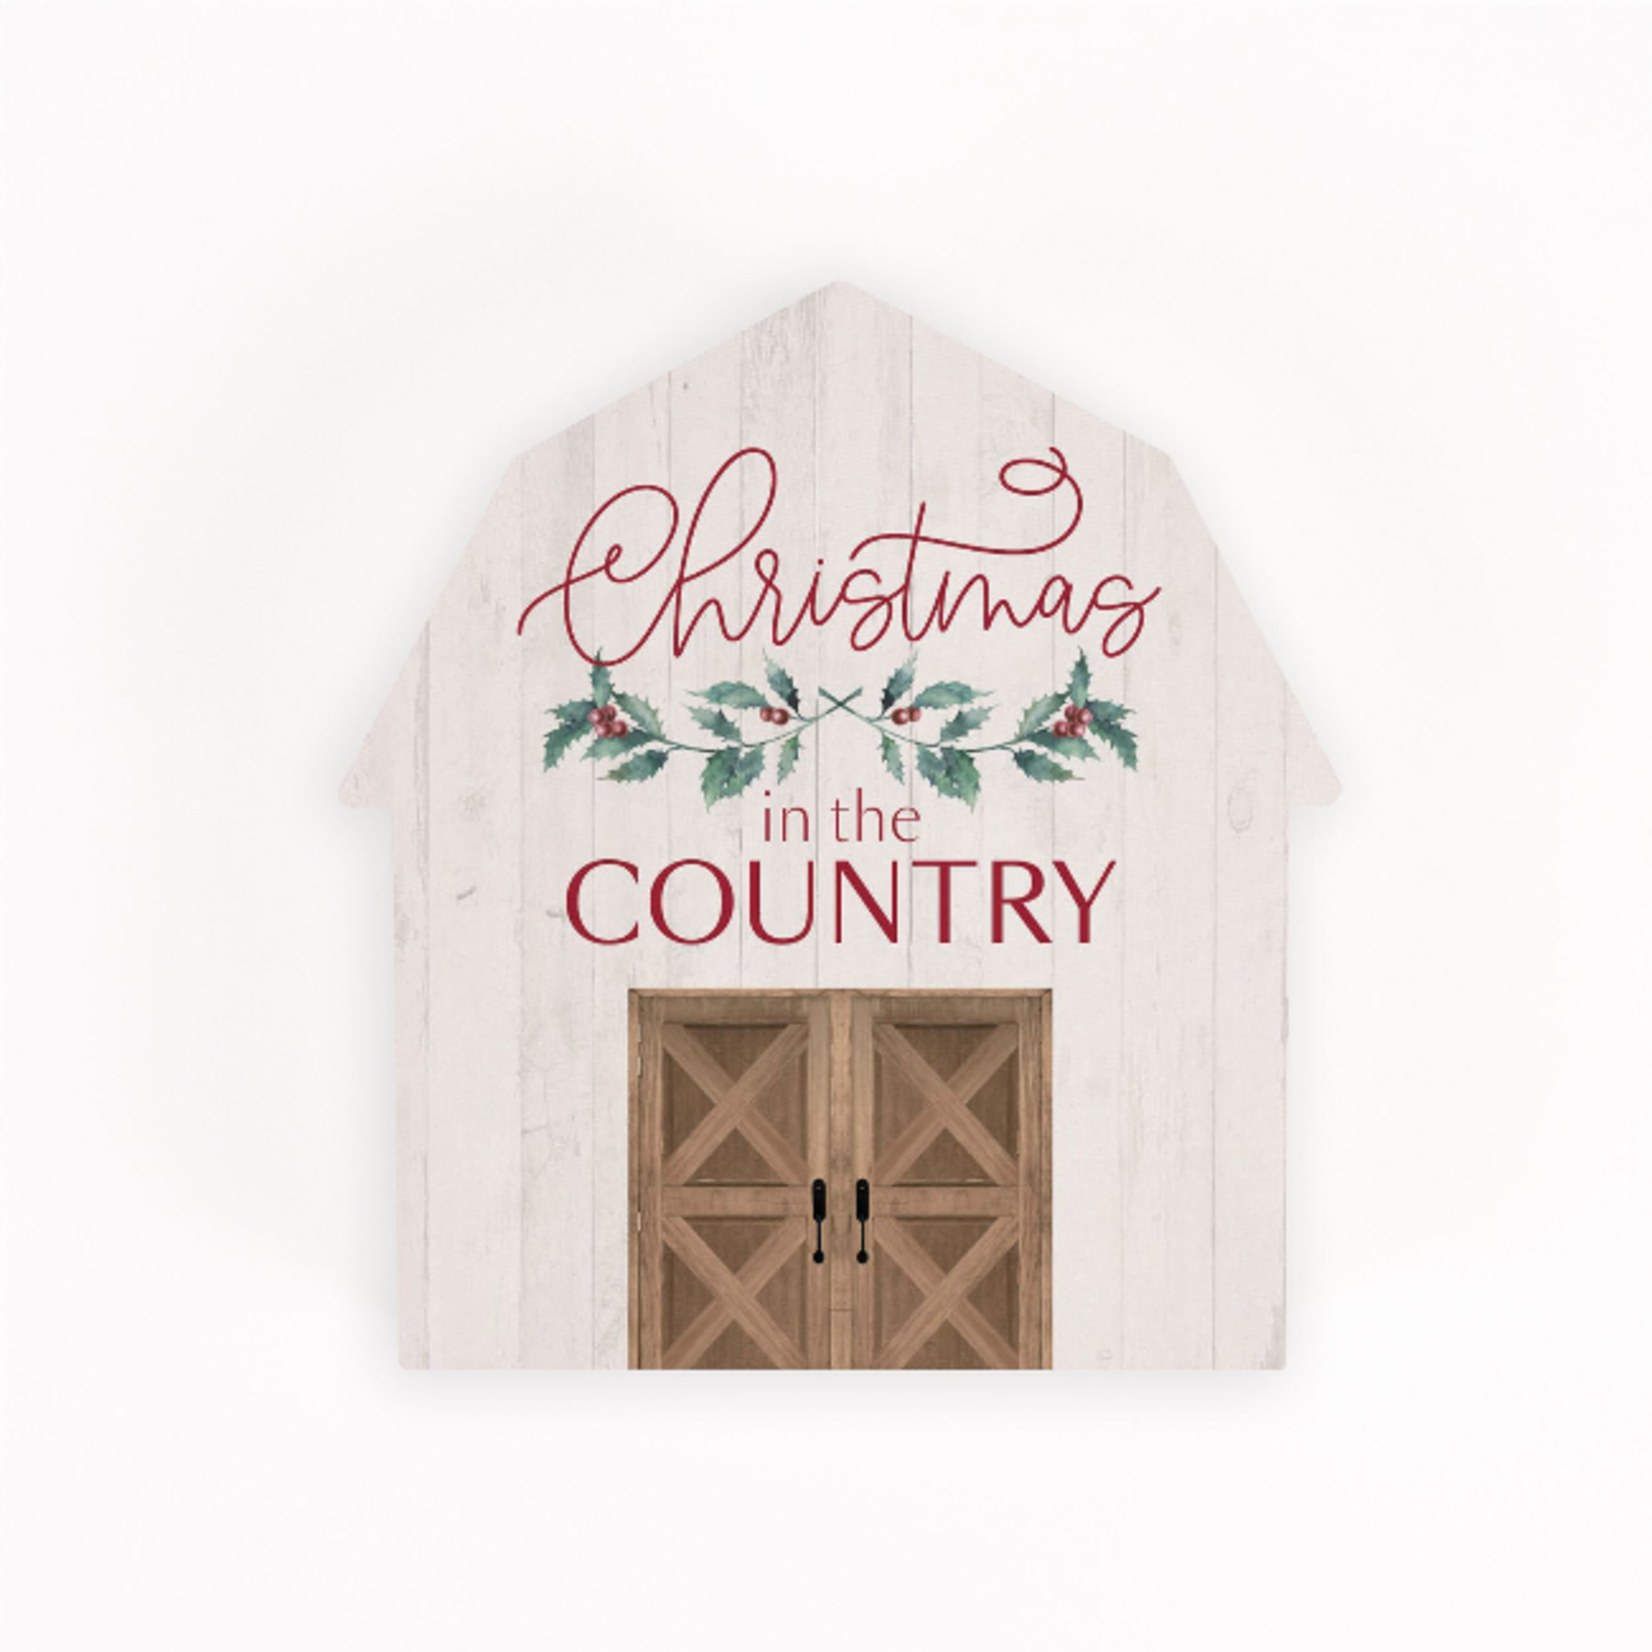 Christmas in the country barn sign